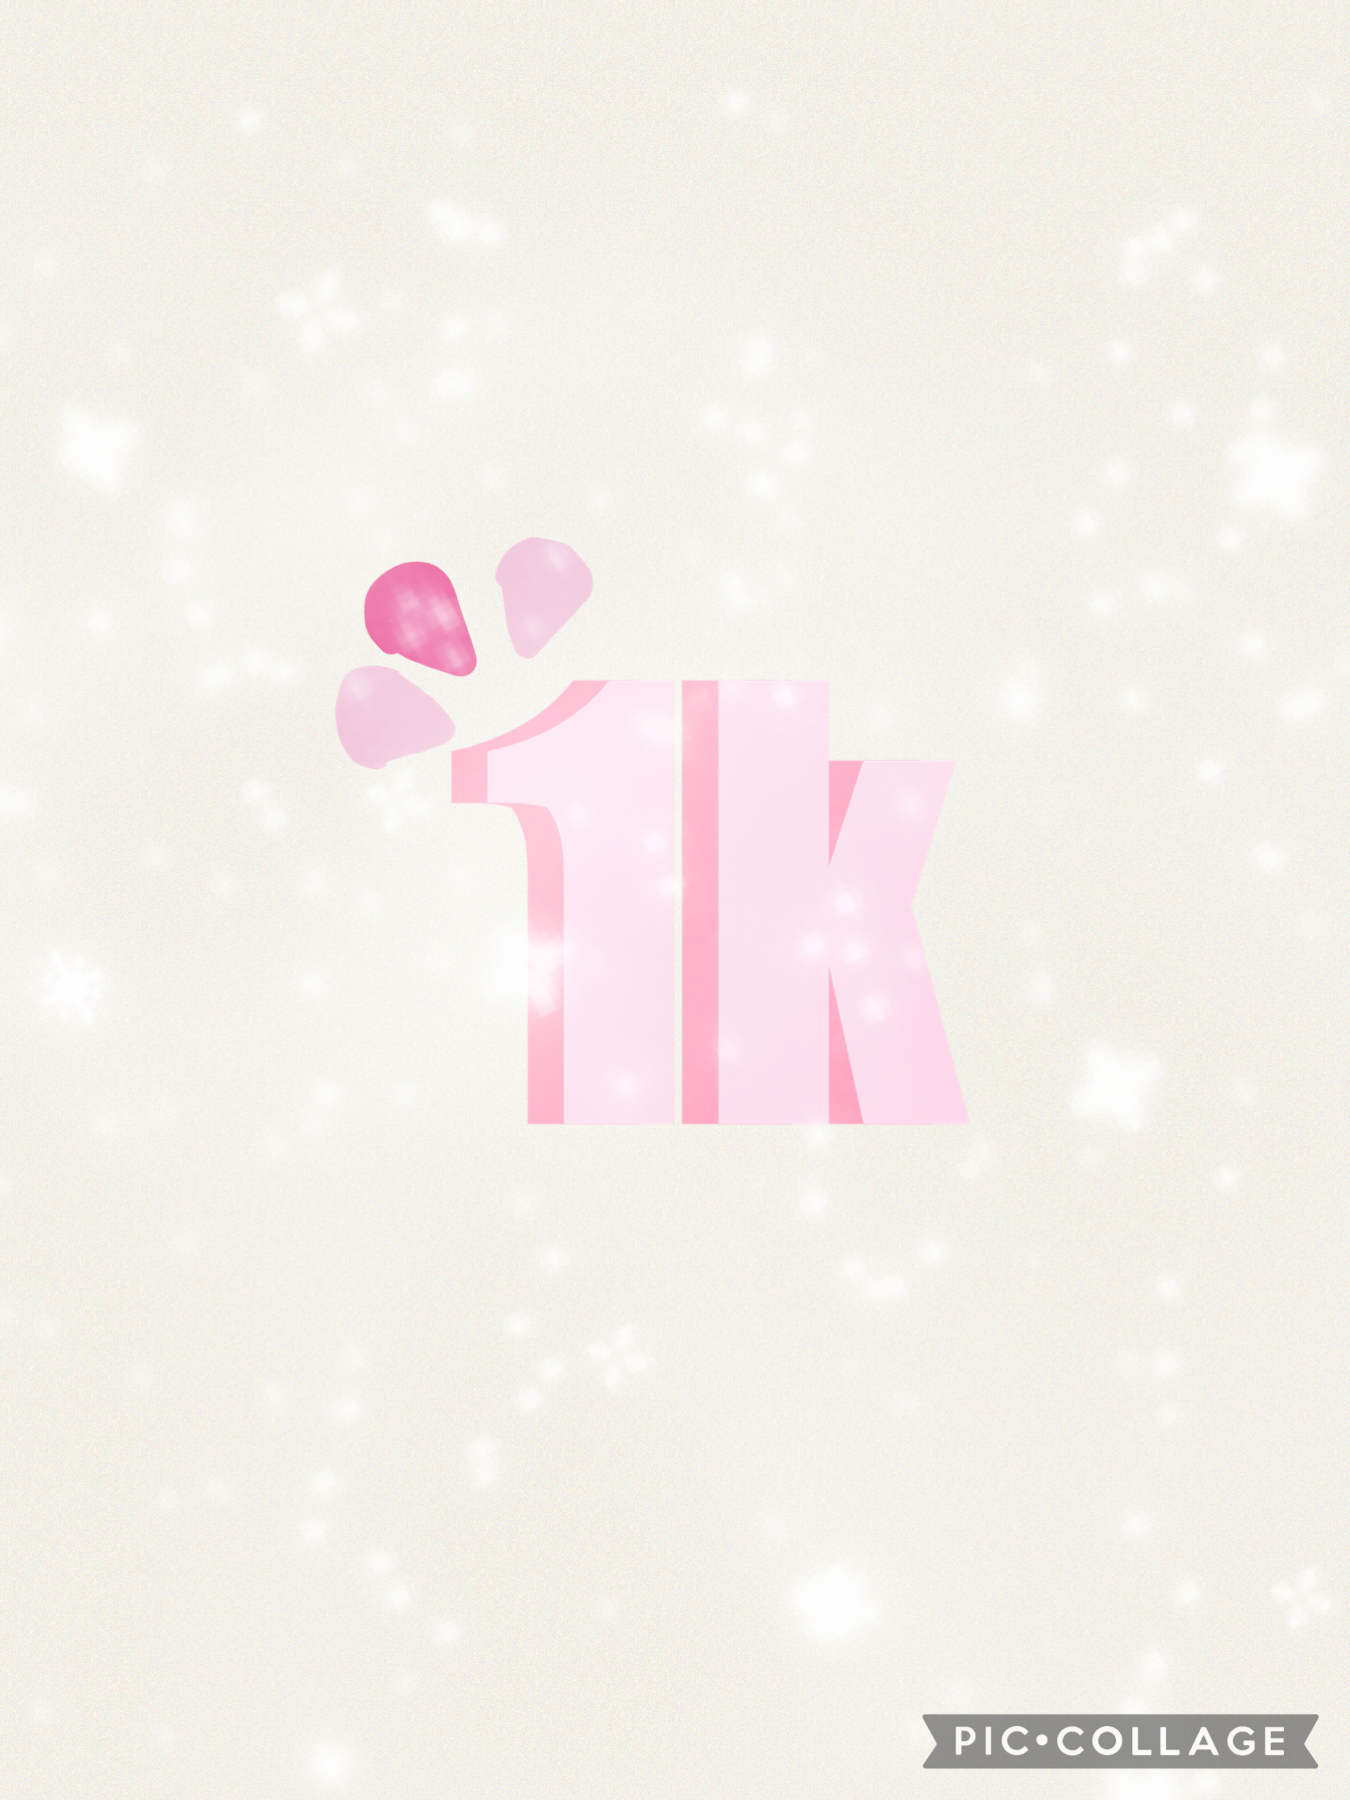 🥳Tap🥳
Thank you so much for 1k followers you all mean so much to me my dream has now come true on Pic thank you all so much for being there for me love you all so much!💖